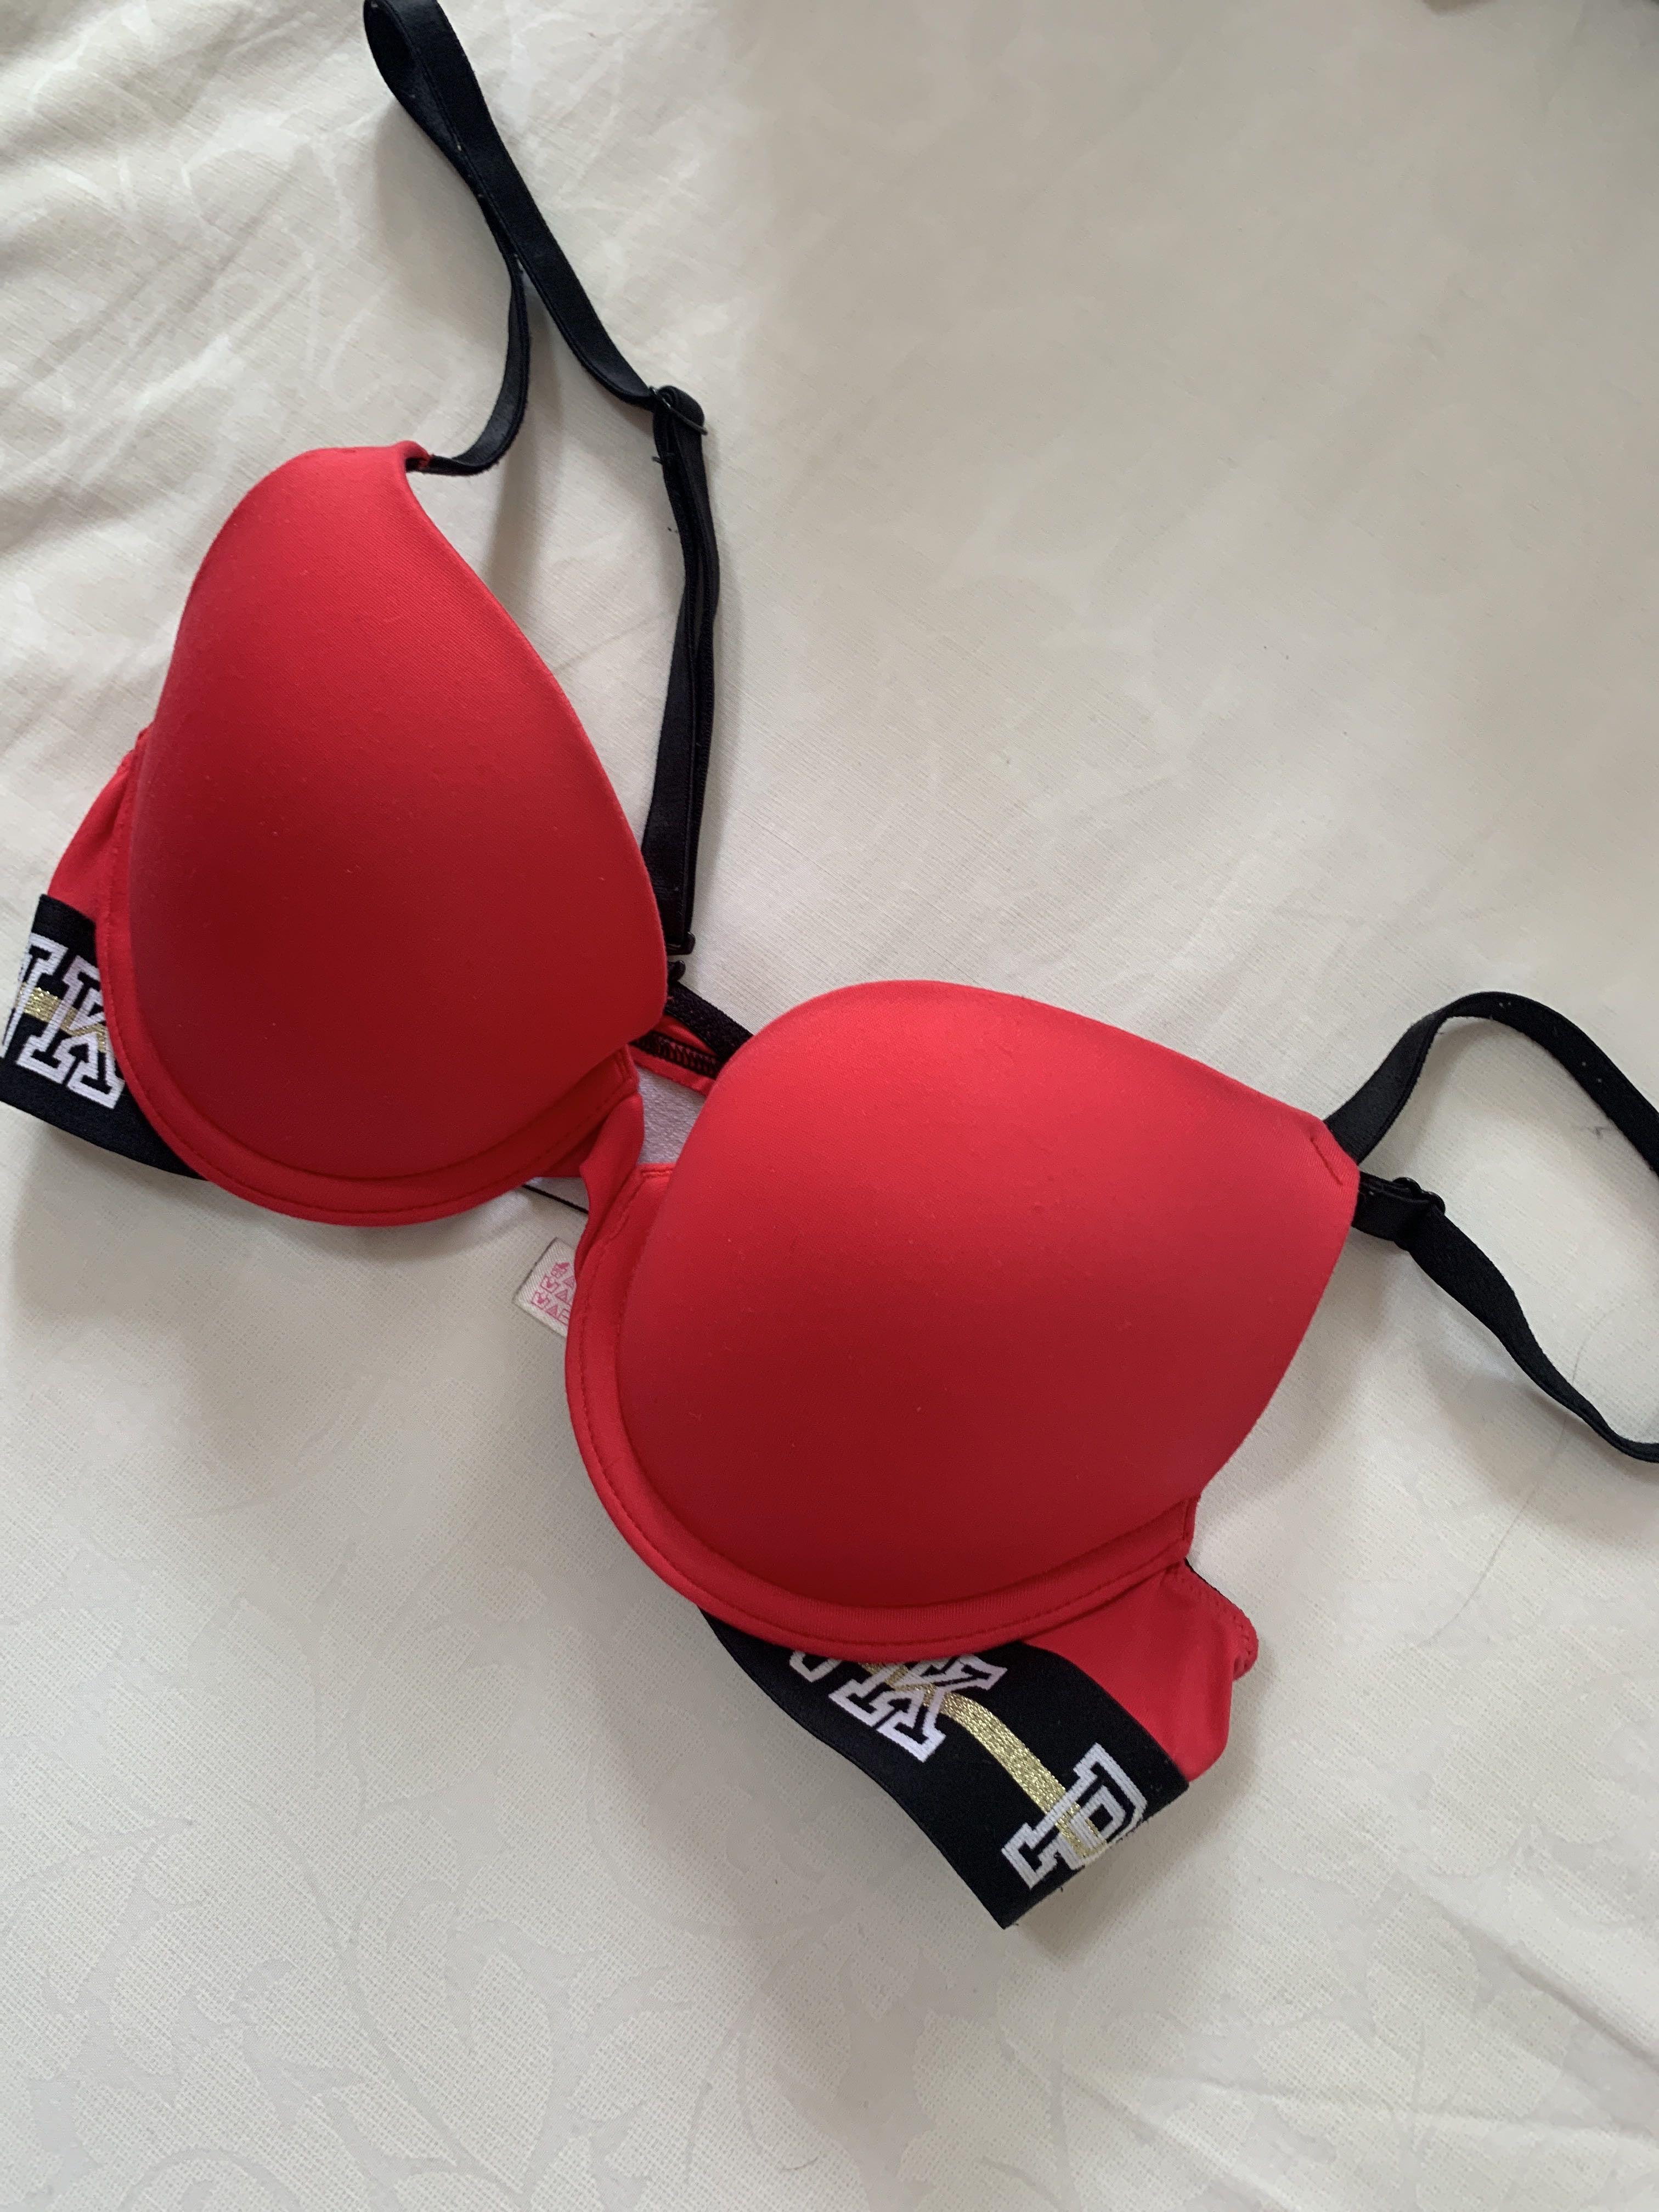 Victoria's Secret PINK Red Push-up Bra 32A, Women's Fashion, New  Undergarments & Loungewear on Carousell